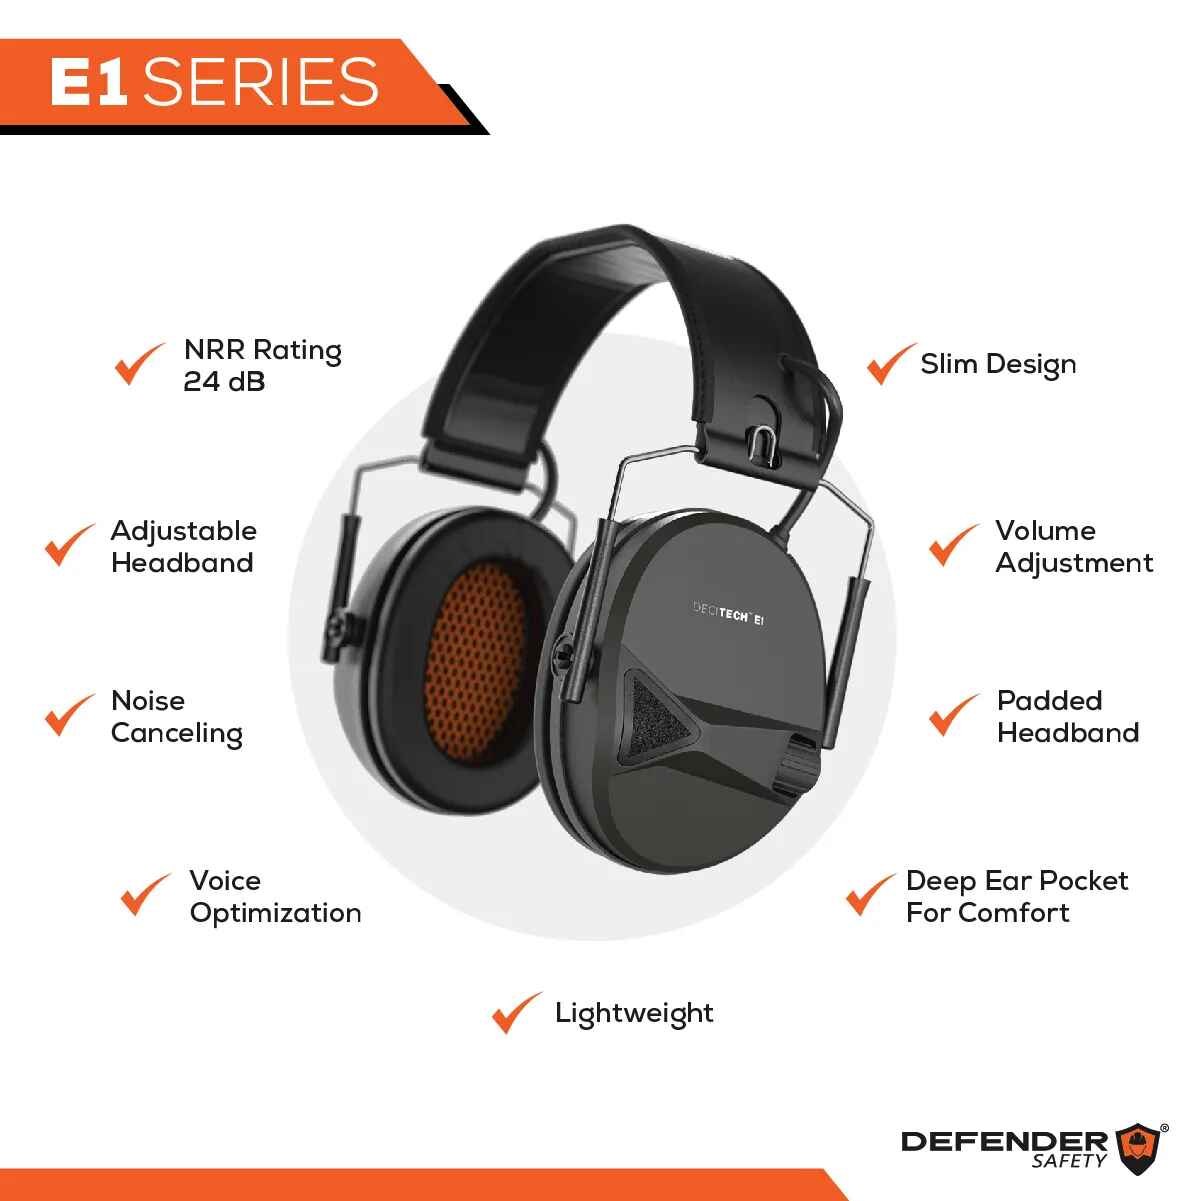 DECITECH™ E1 Active Hearing Protection, Over the Head Earmuffs - Defender Safety